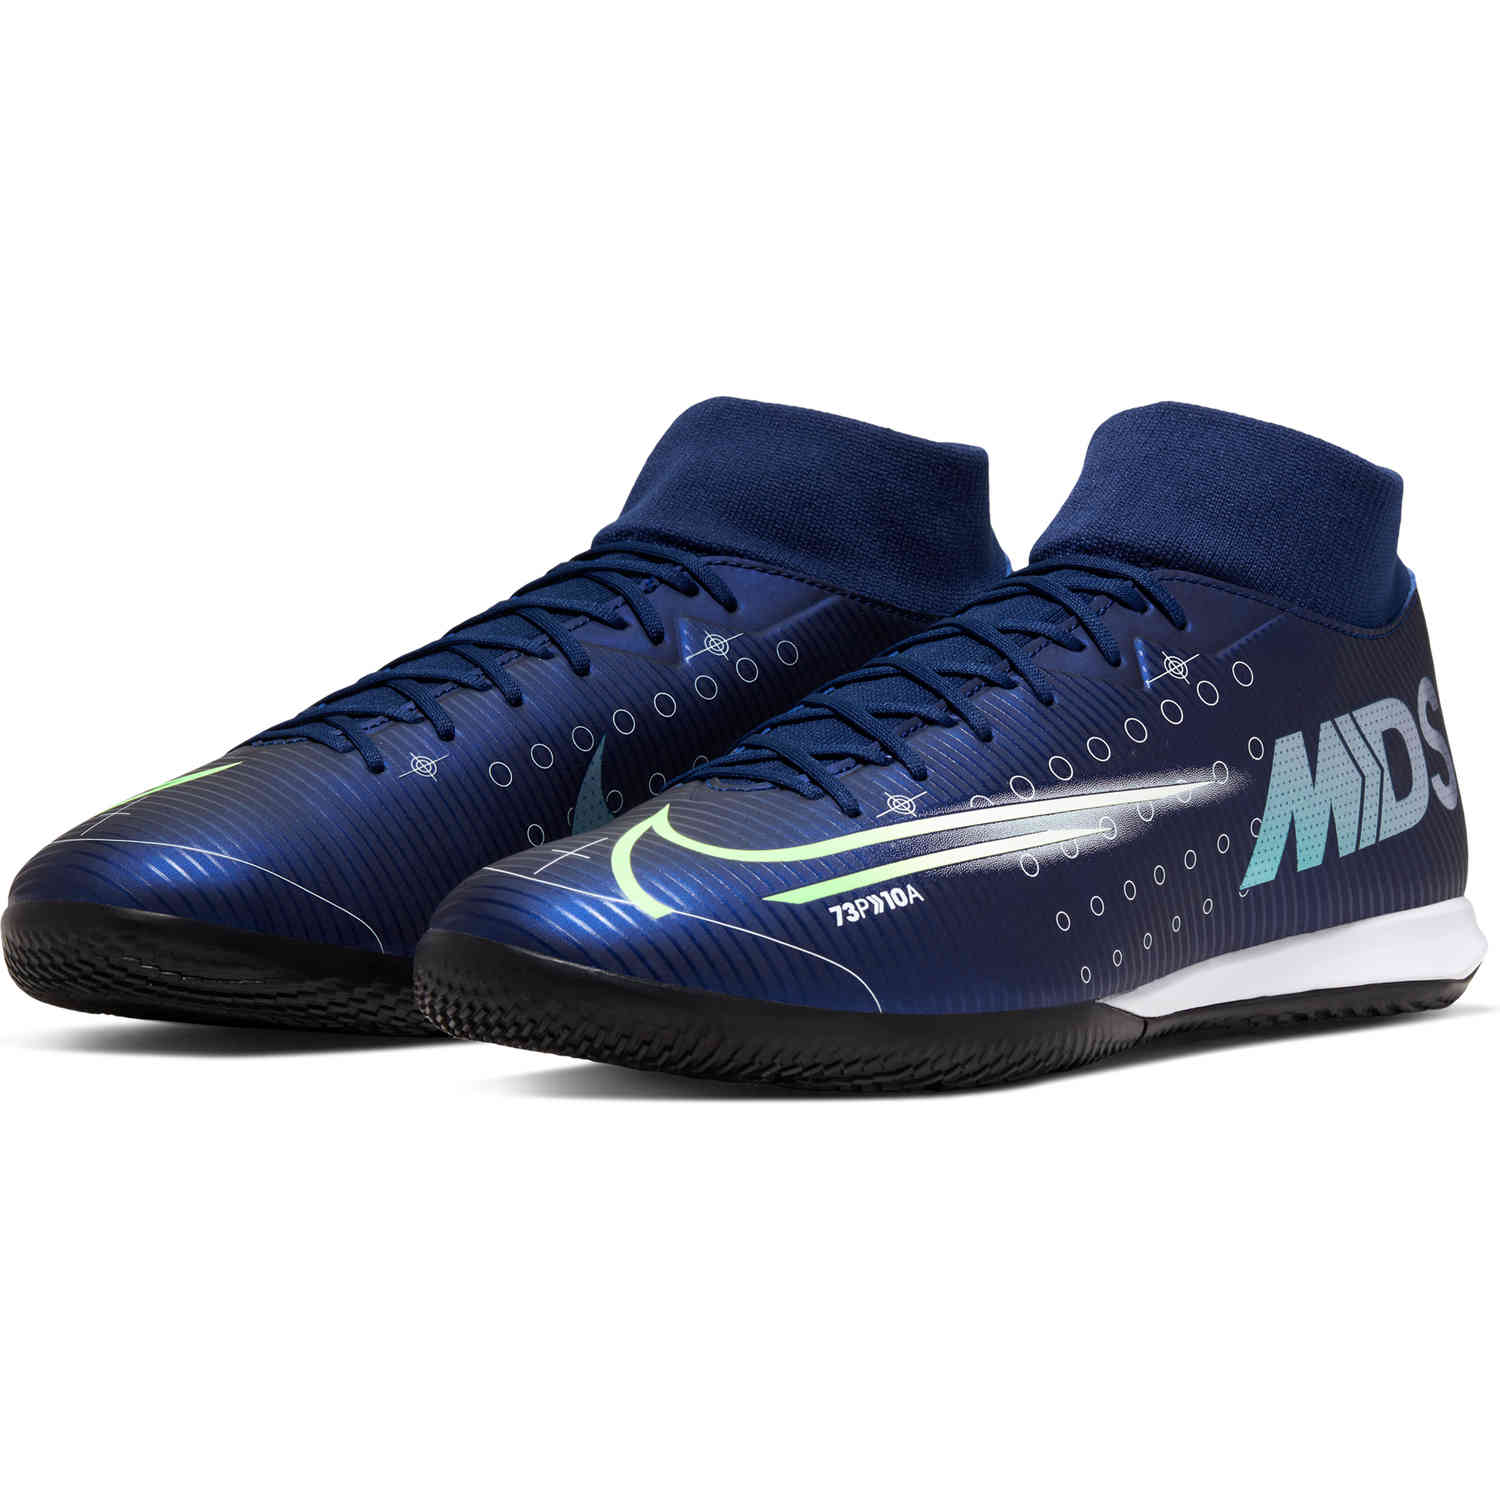 nike cr7 casual shoes